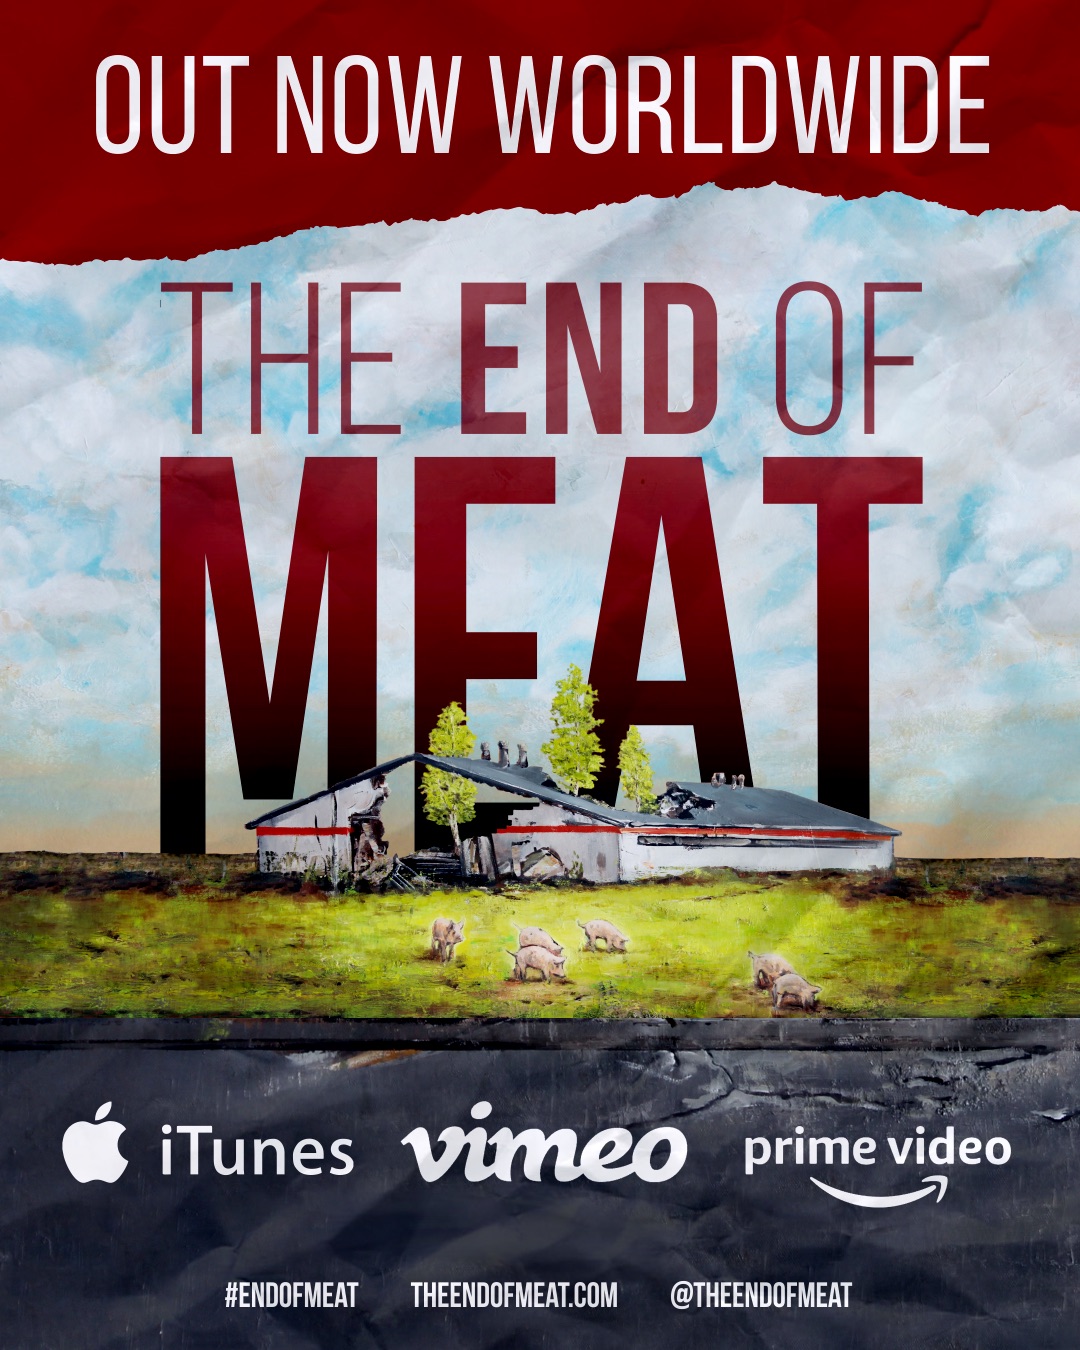 The End Of Meat - Watch it now!